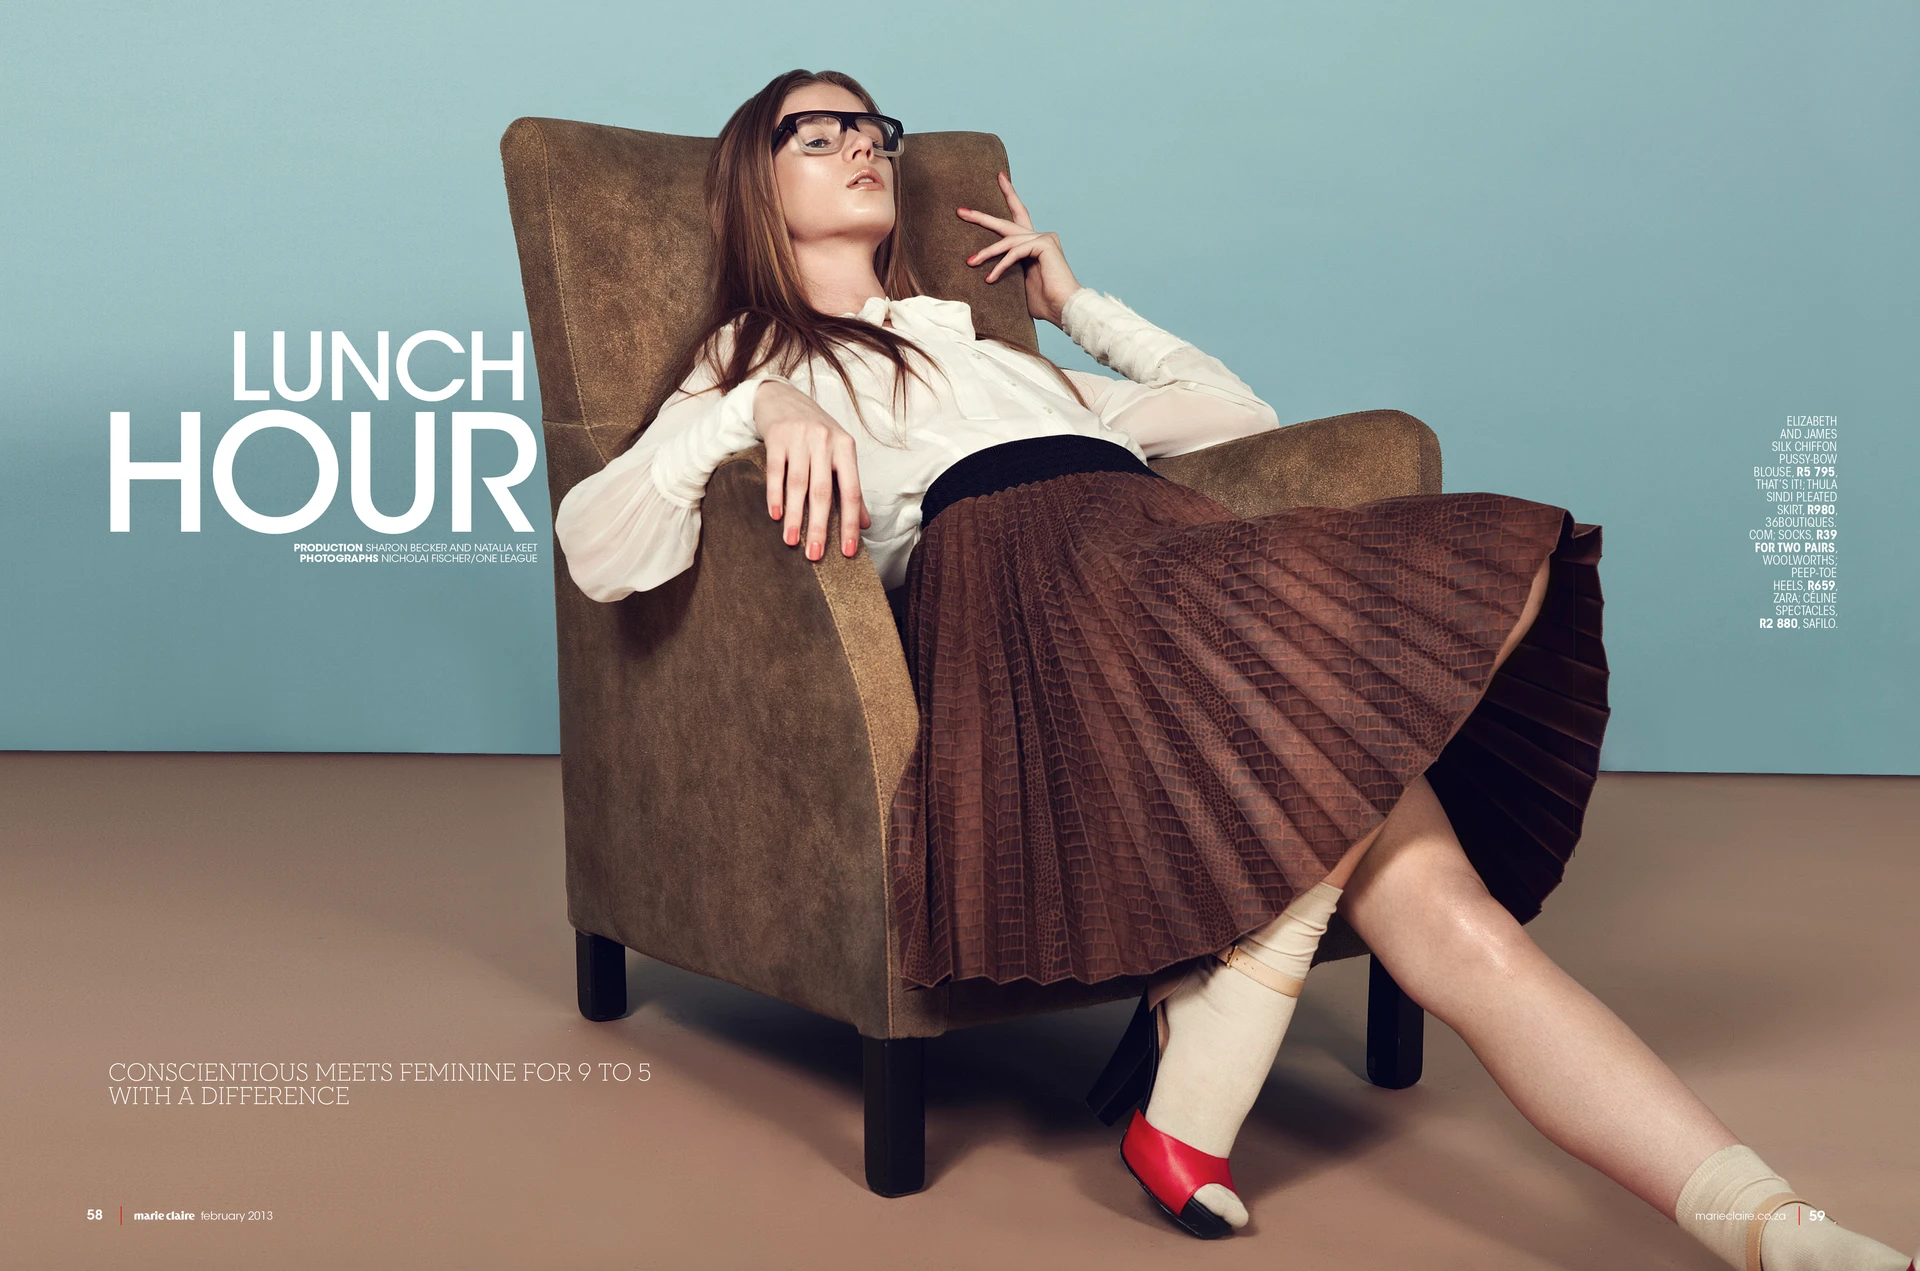 Woman lounging in a suede chair, wearing white blouse, quilted brown skirt, and mismatched heels. Caption 'LUNCH HOUR' prominently displayed. Set against a blue background. Fashion shoot for Marie Claire.